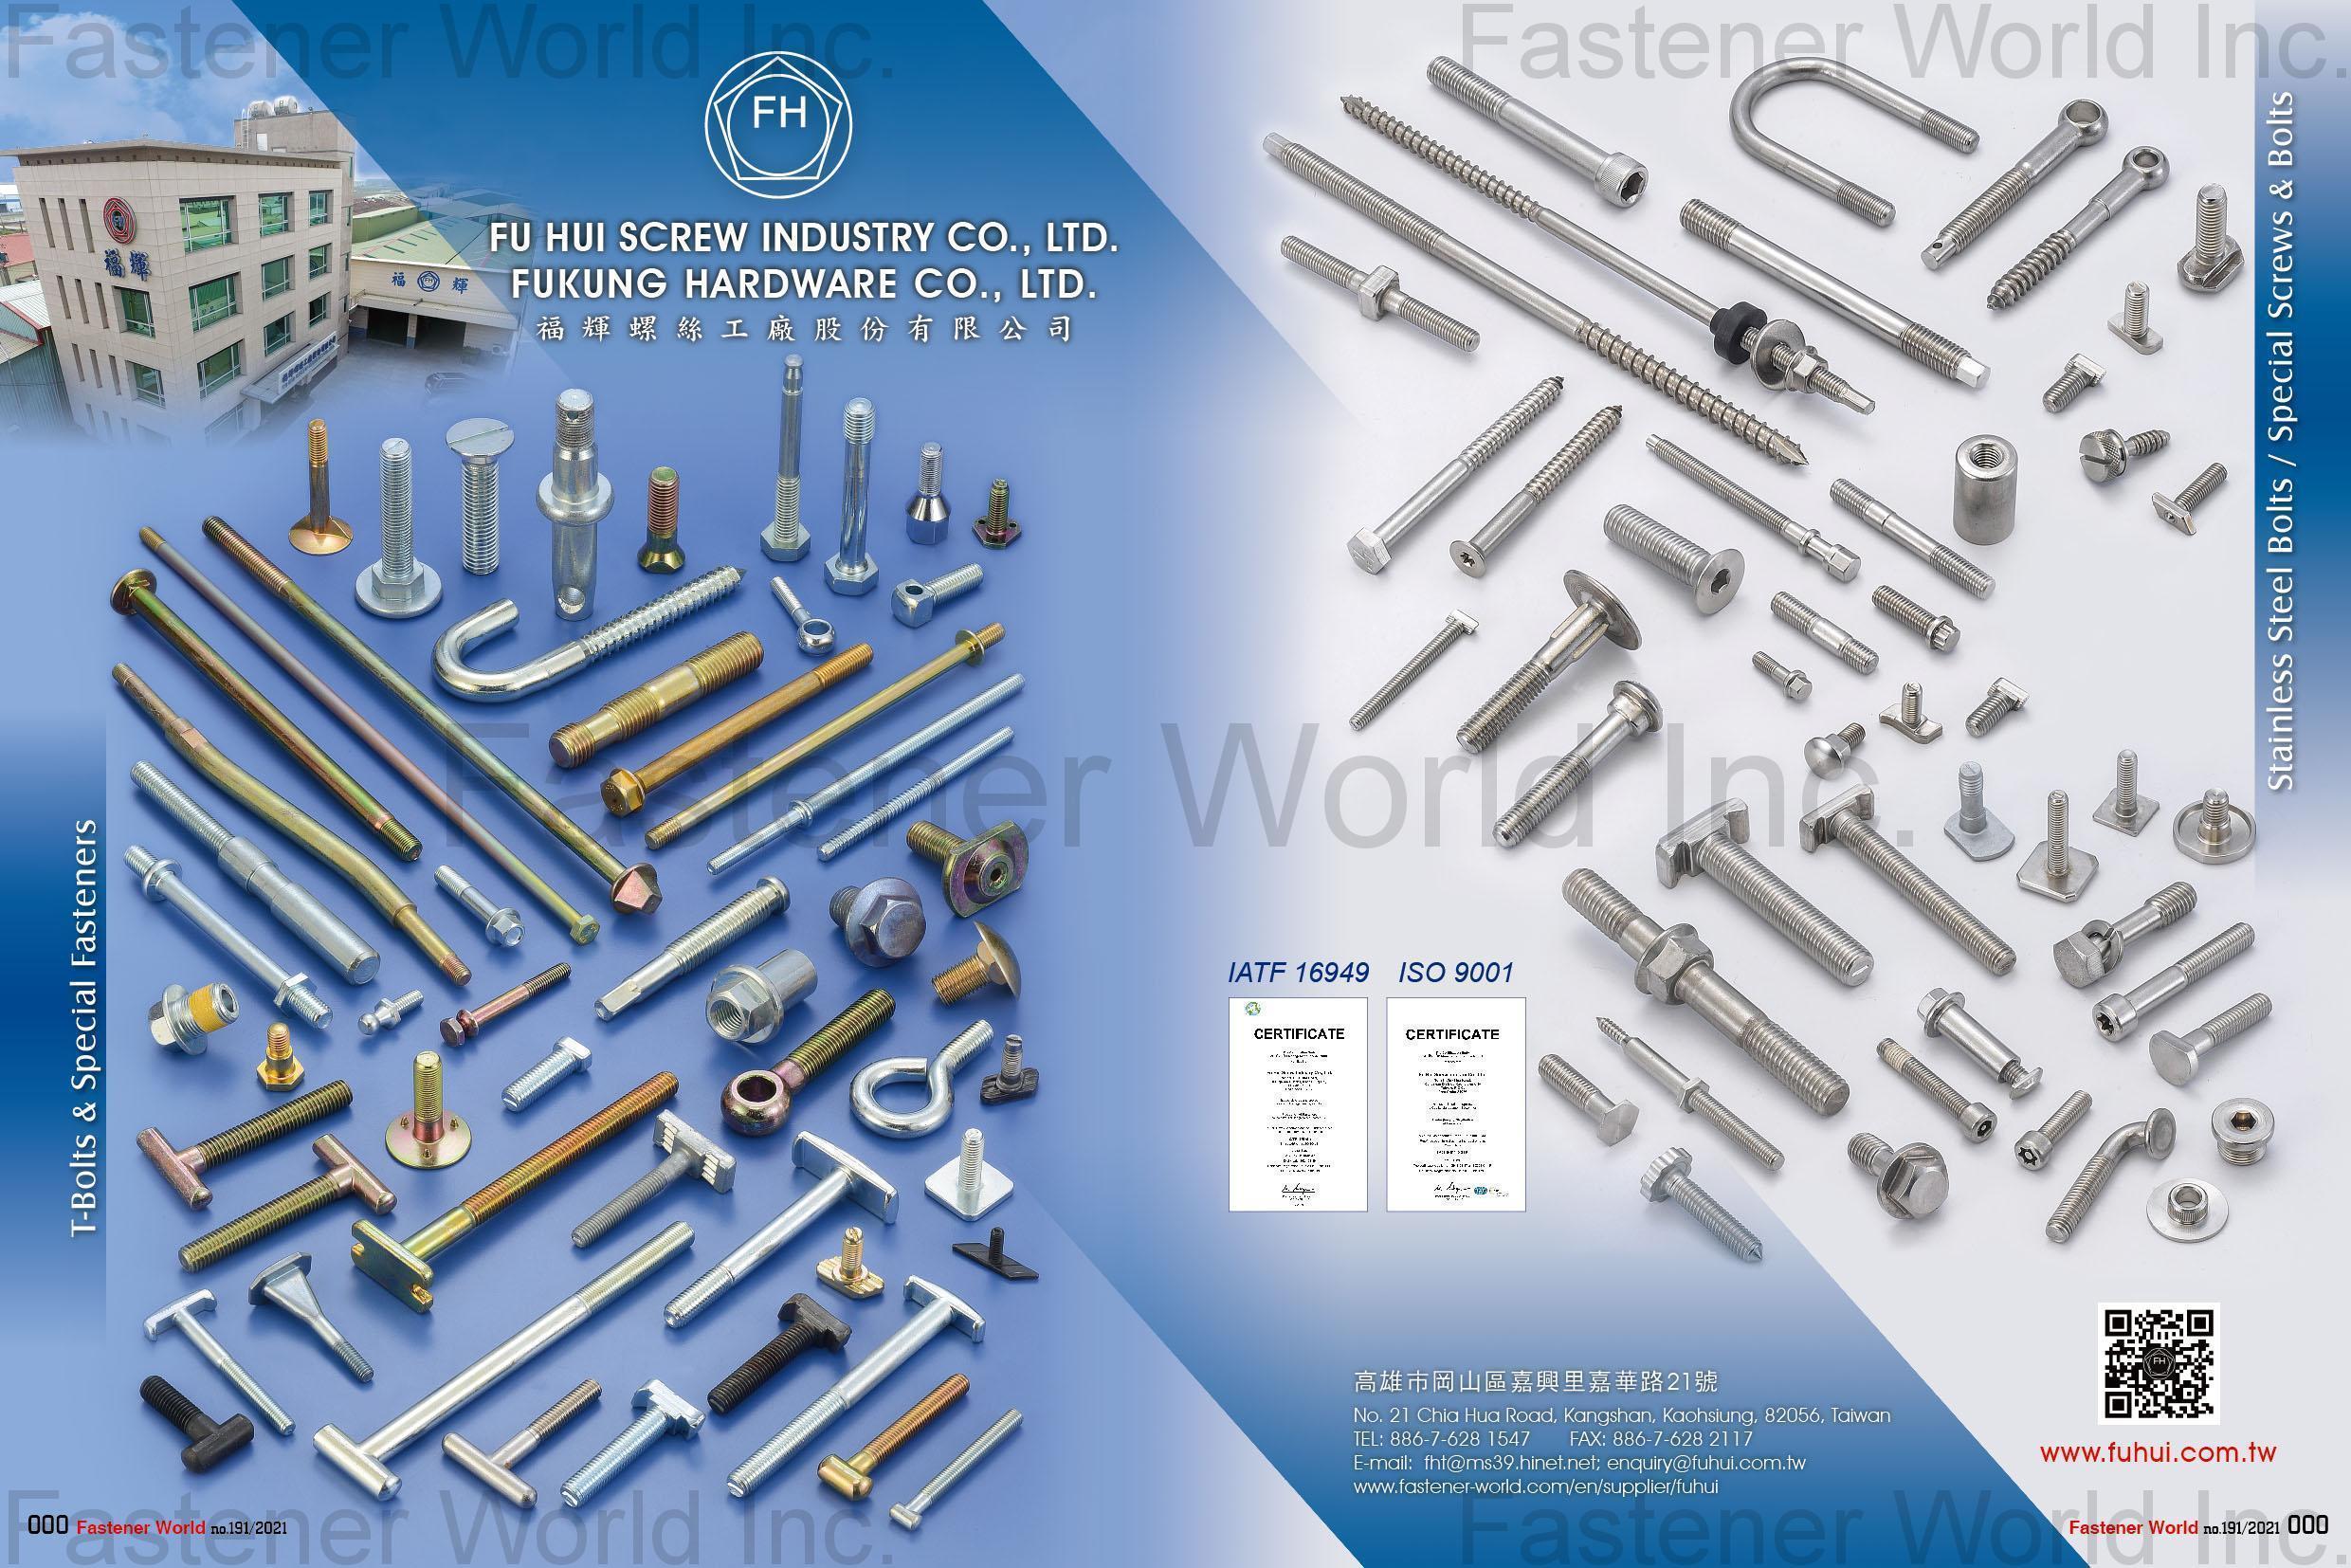 FU HUI SCREW INDUSTRY CO., LTD. (FUKUNG  HARDWARE  CO.  LTD.) , Special Screws & Bolts, Stainless Steel Bolts, Special Material Bolts, Custom Engineered Parts, Custom-Design Bolts, Stainless Steel Special Parts, Stainless Steel & Carbon Steel T-Bolts, Class 8.8, 10.9, 12.9 Automotive & Industrial Components